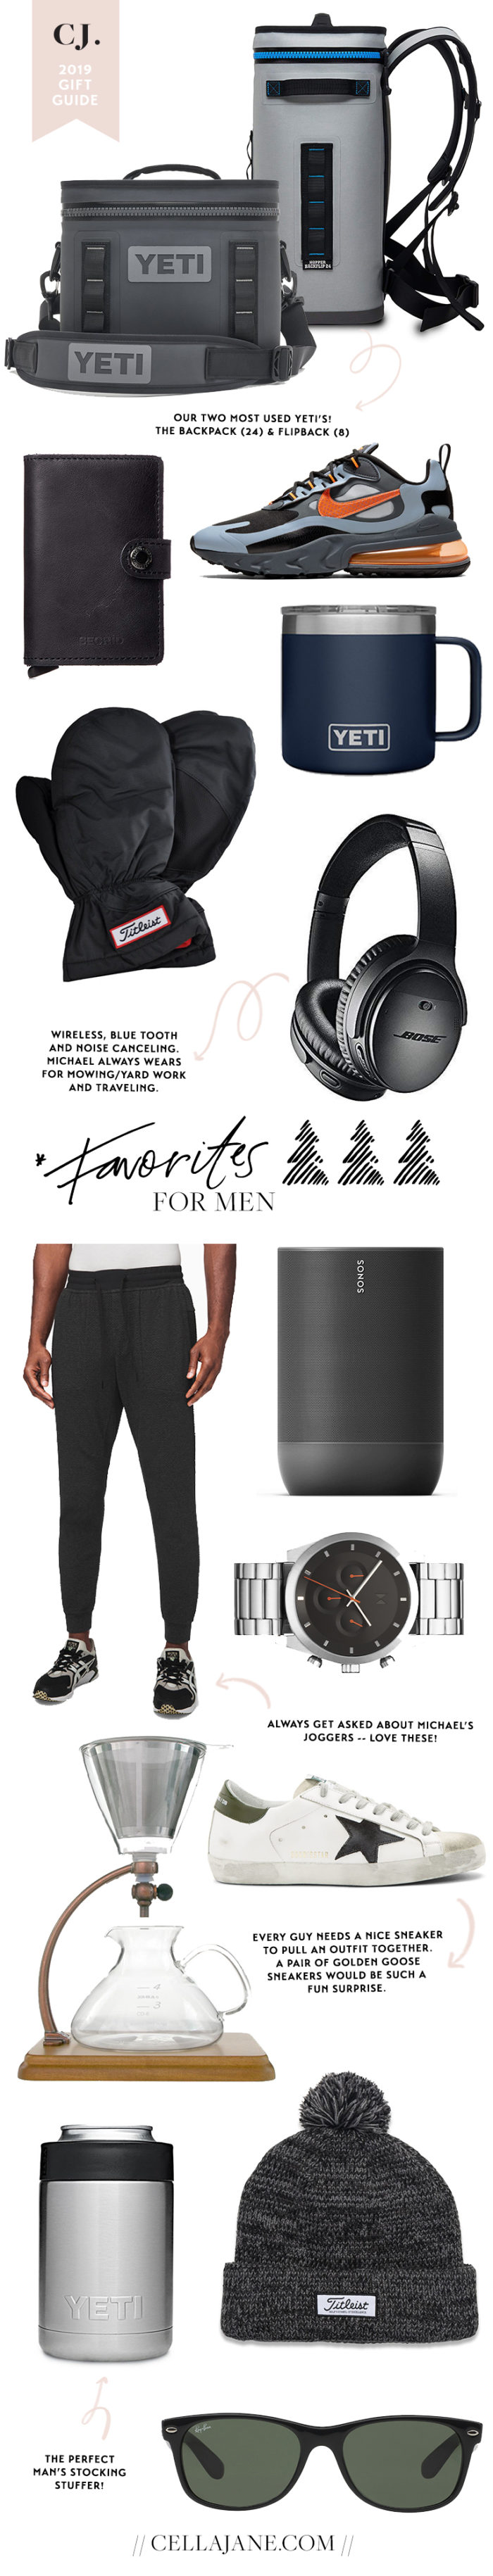 50 Best Travel Gifts for Men: Presents & Gift Ideas for Him